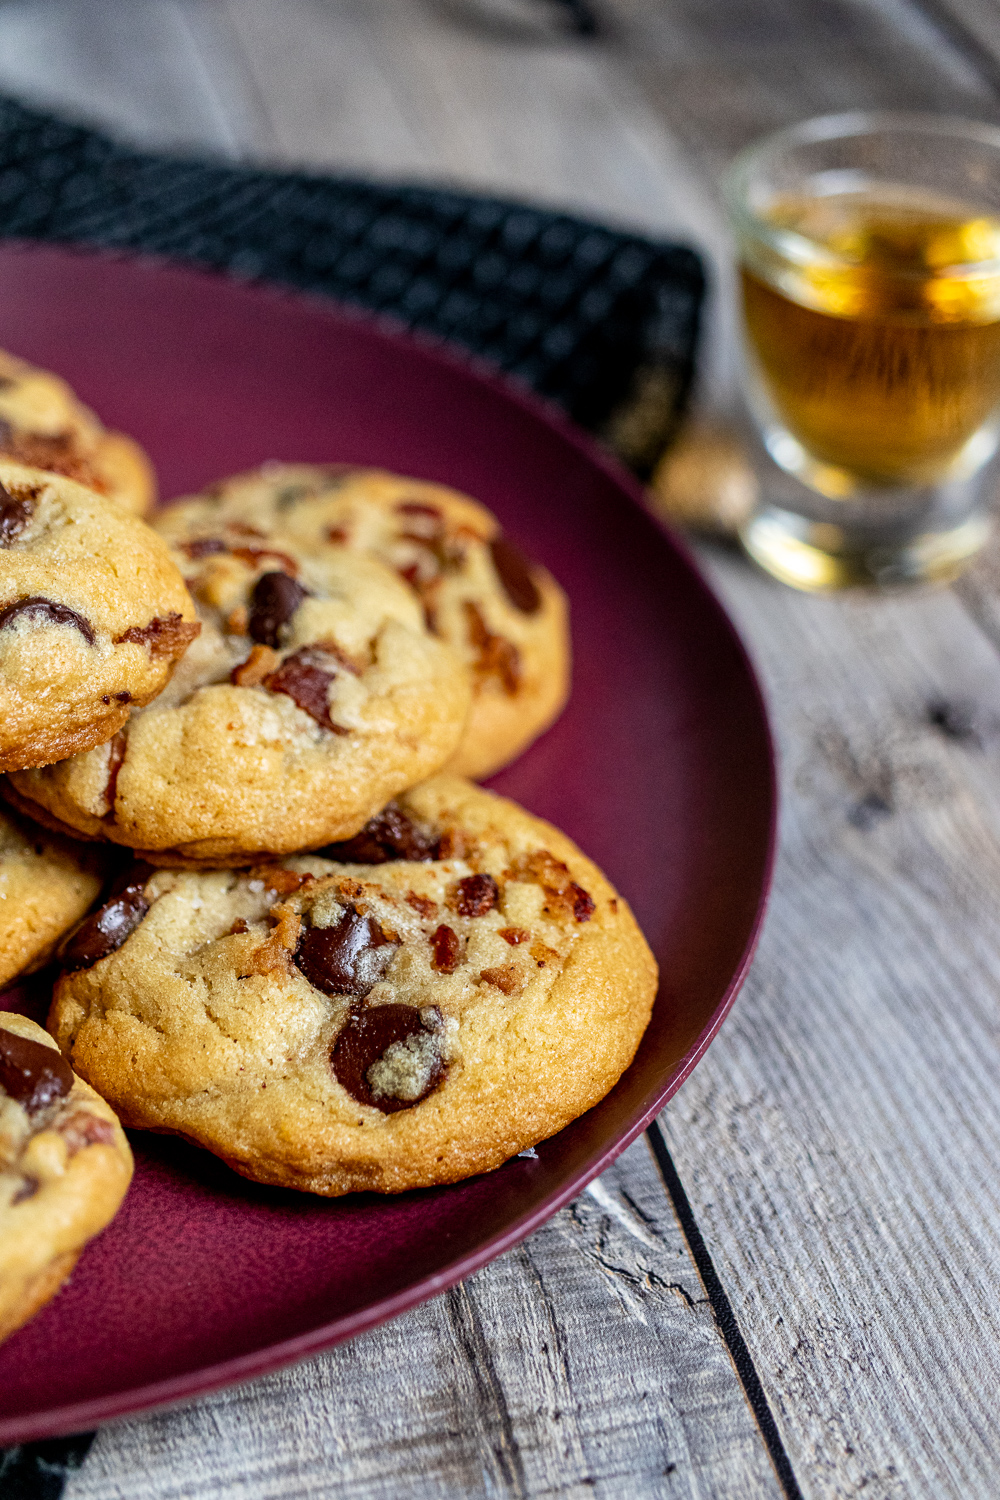 How To Make Bacon Up Chocolate Chip Bourbon Cookies! 